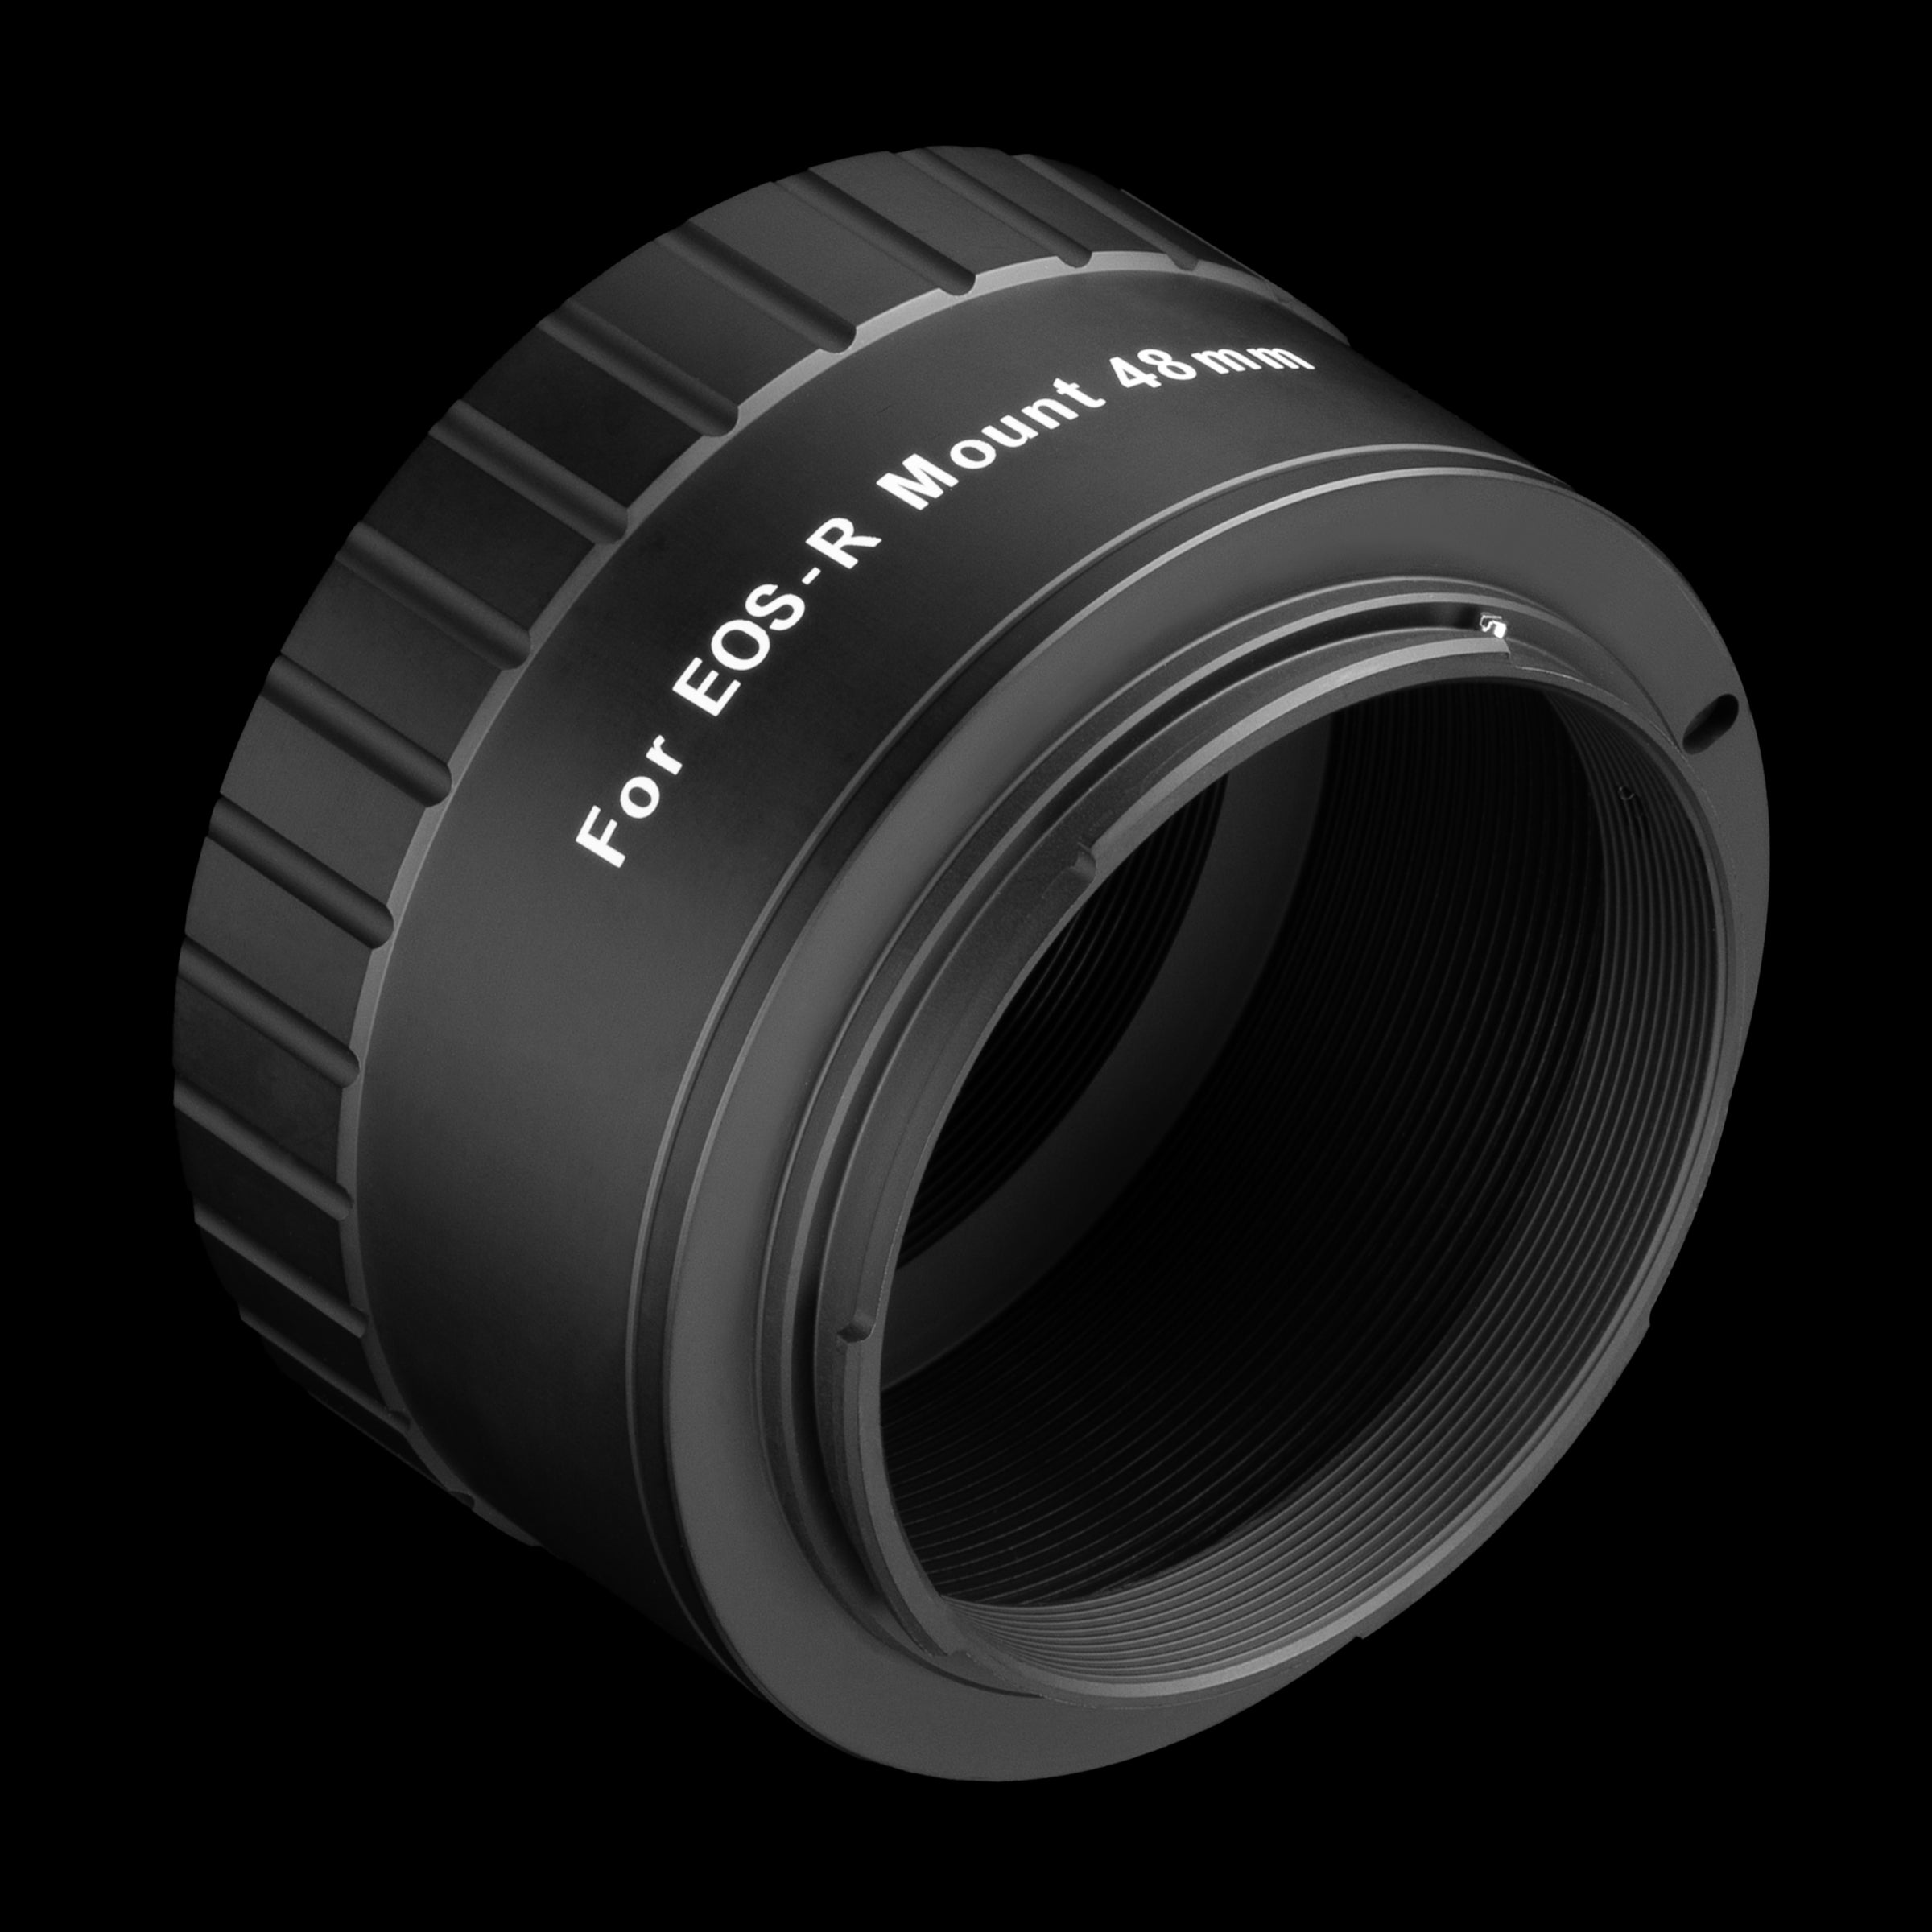 48mm T mount for Canon EOS R Mirrorless Camera